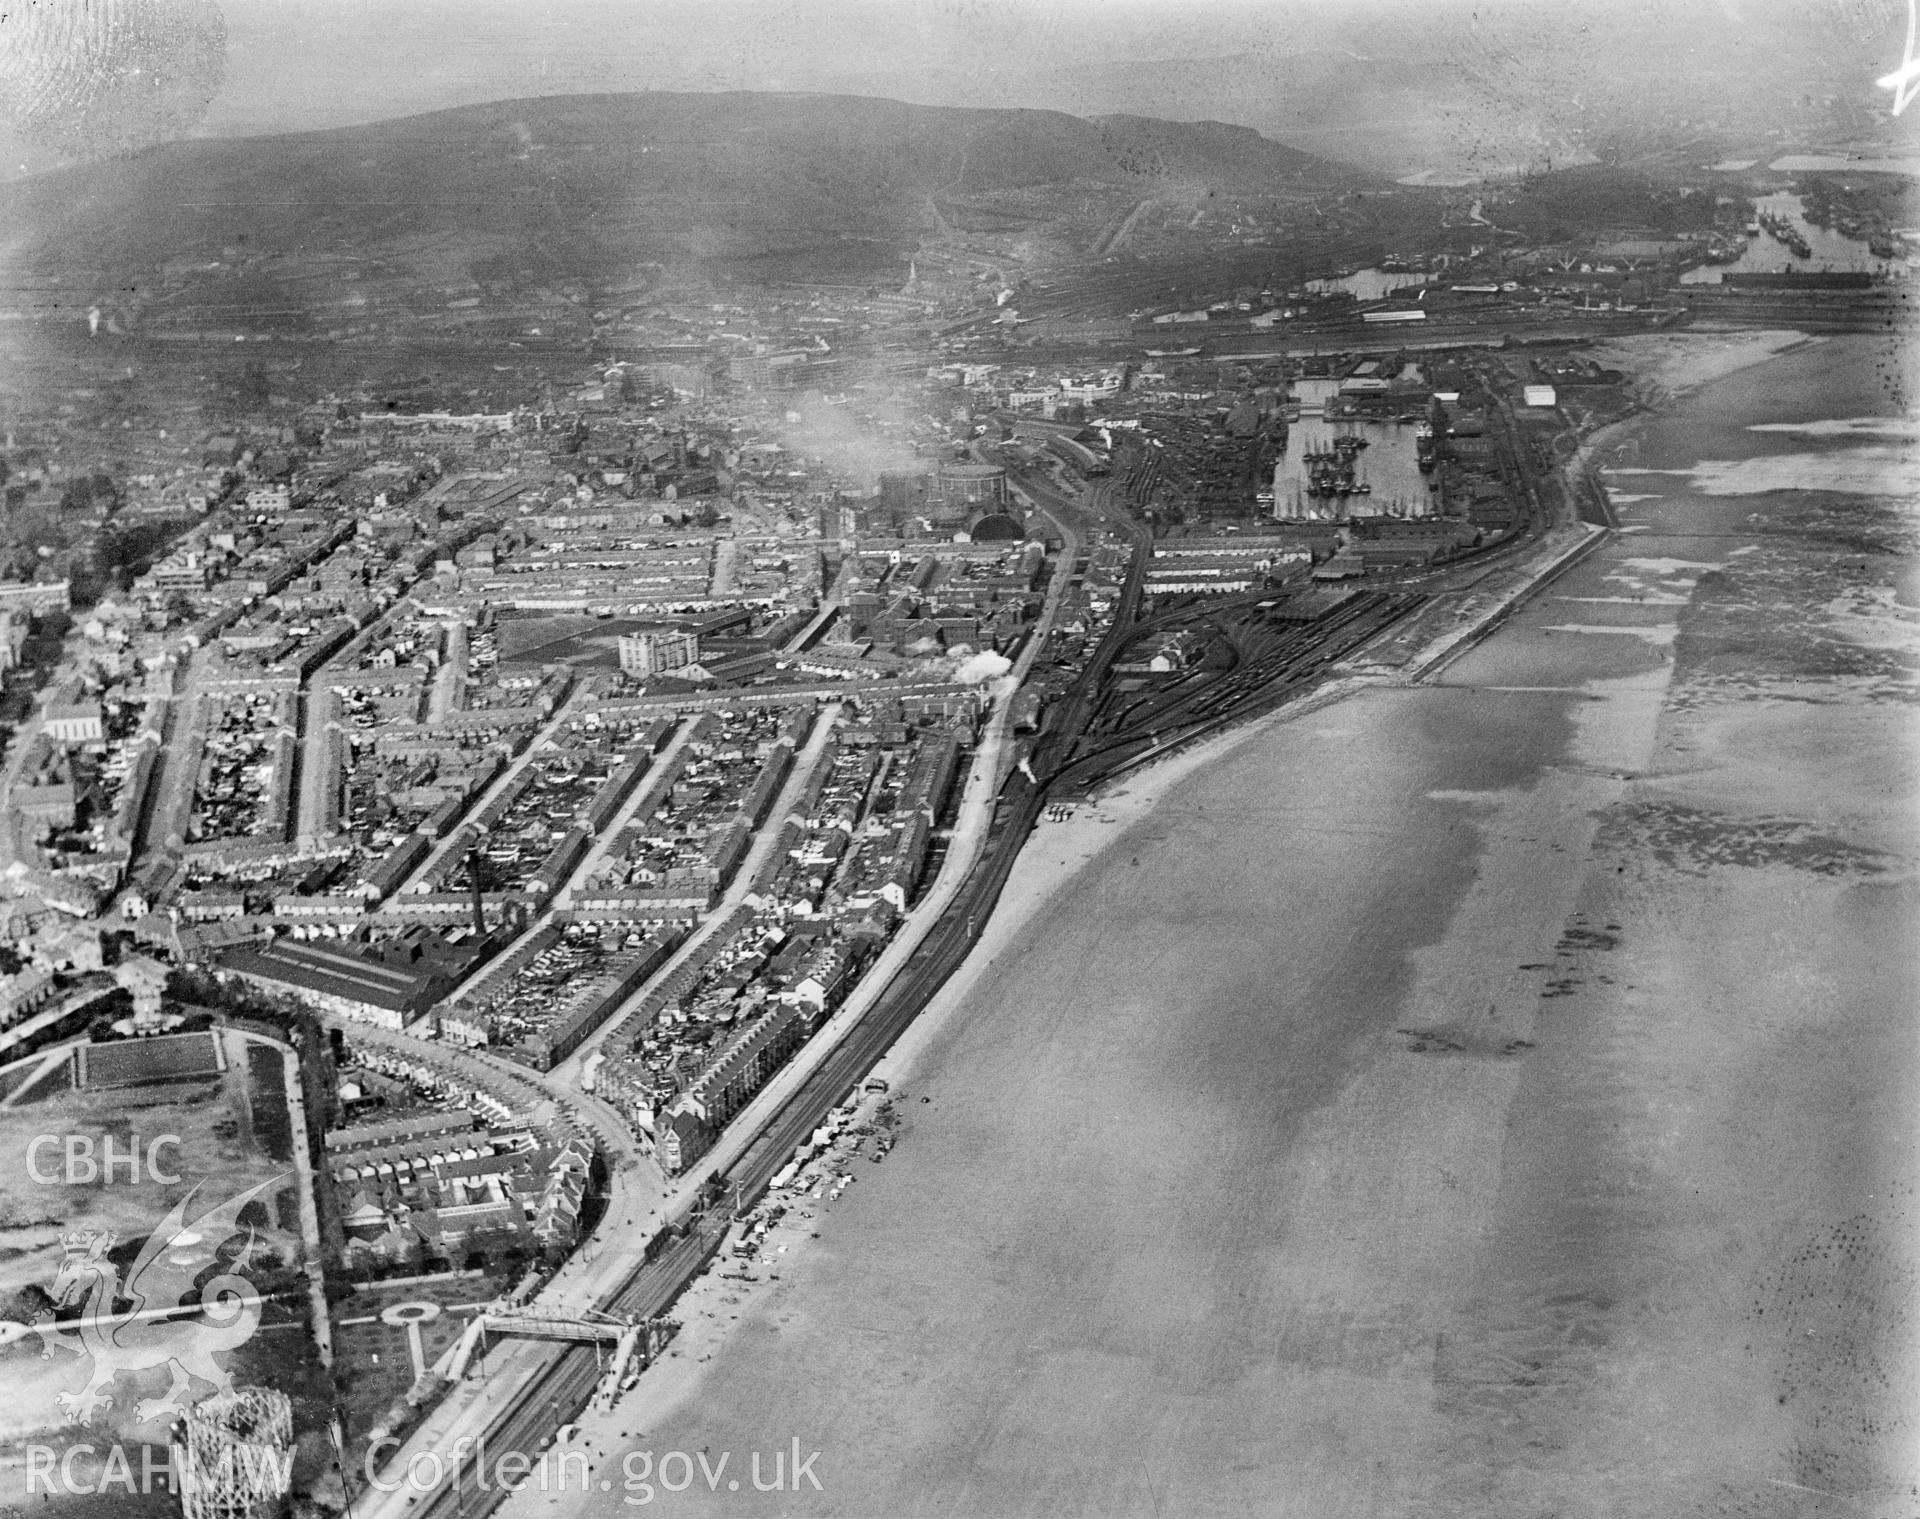 View of Swansea showing Swansea and Mumbles railway and Victoria Park, oblique aerial view. 5?x4? black and white glass plate negative.